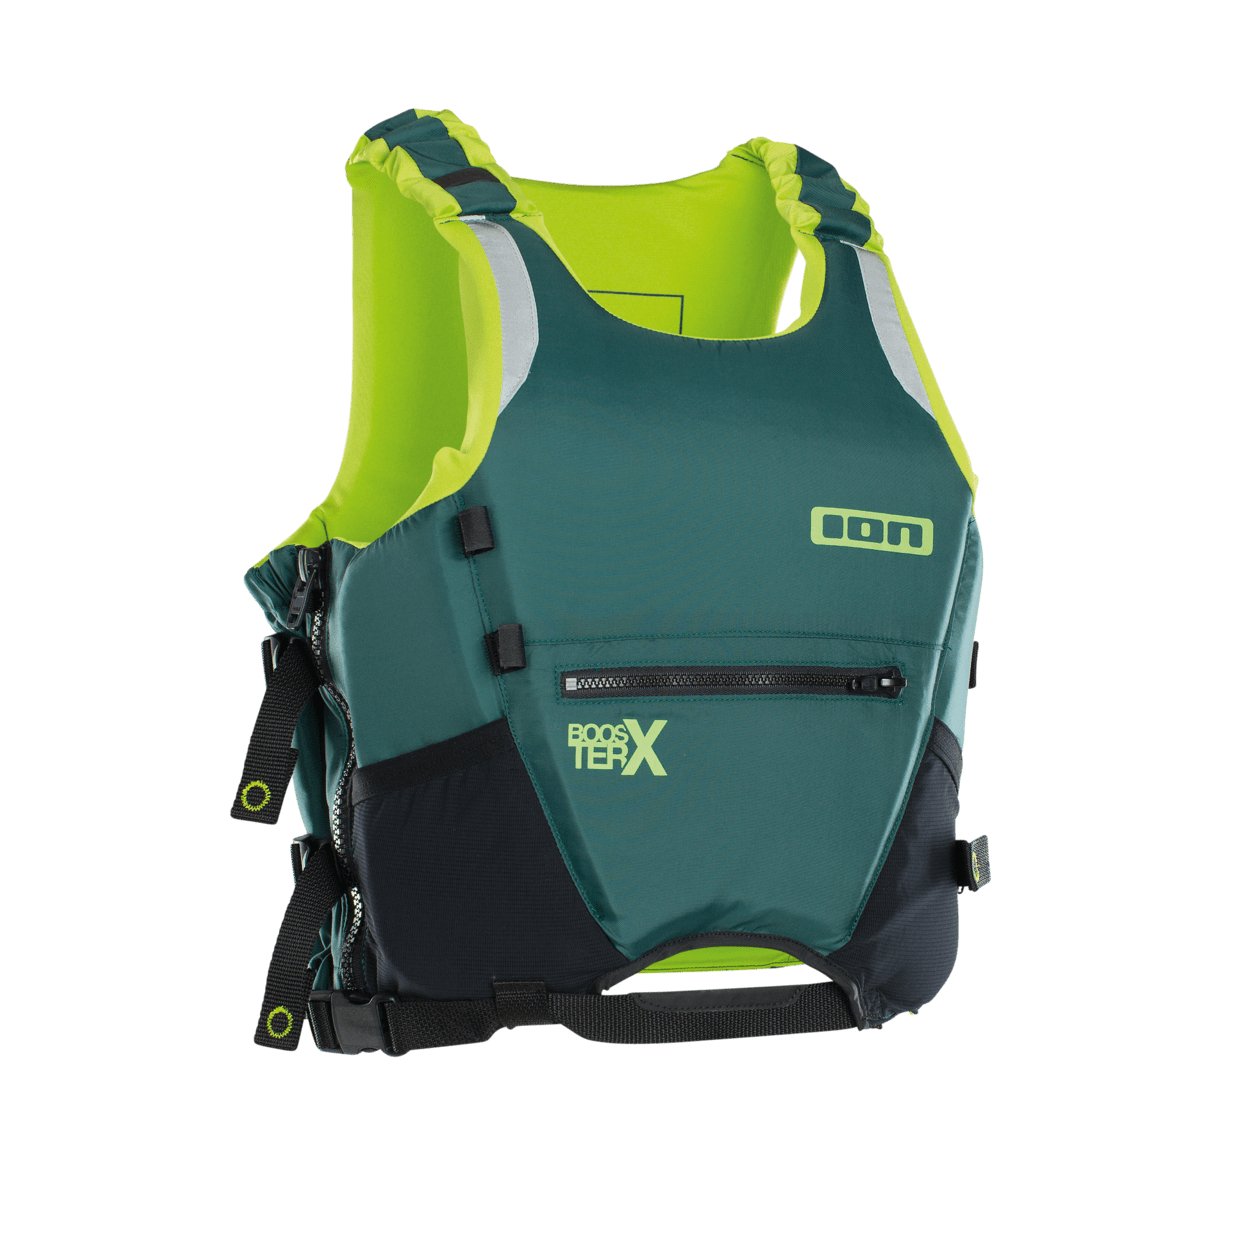 ION Booster Vest 50N SideZip unisex 2022 - Worthing Watersports - 9010583080161 - Protection - ION Water